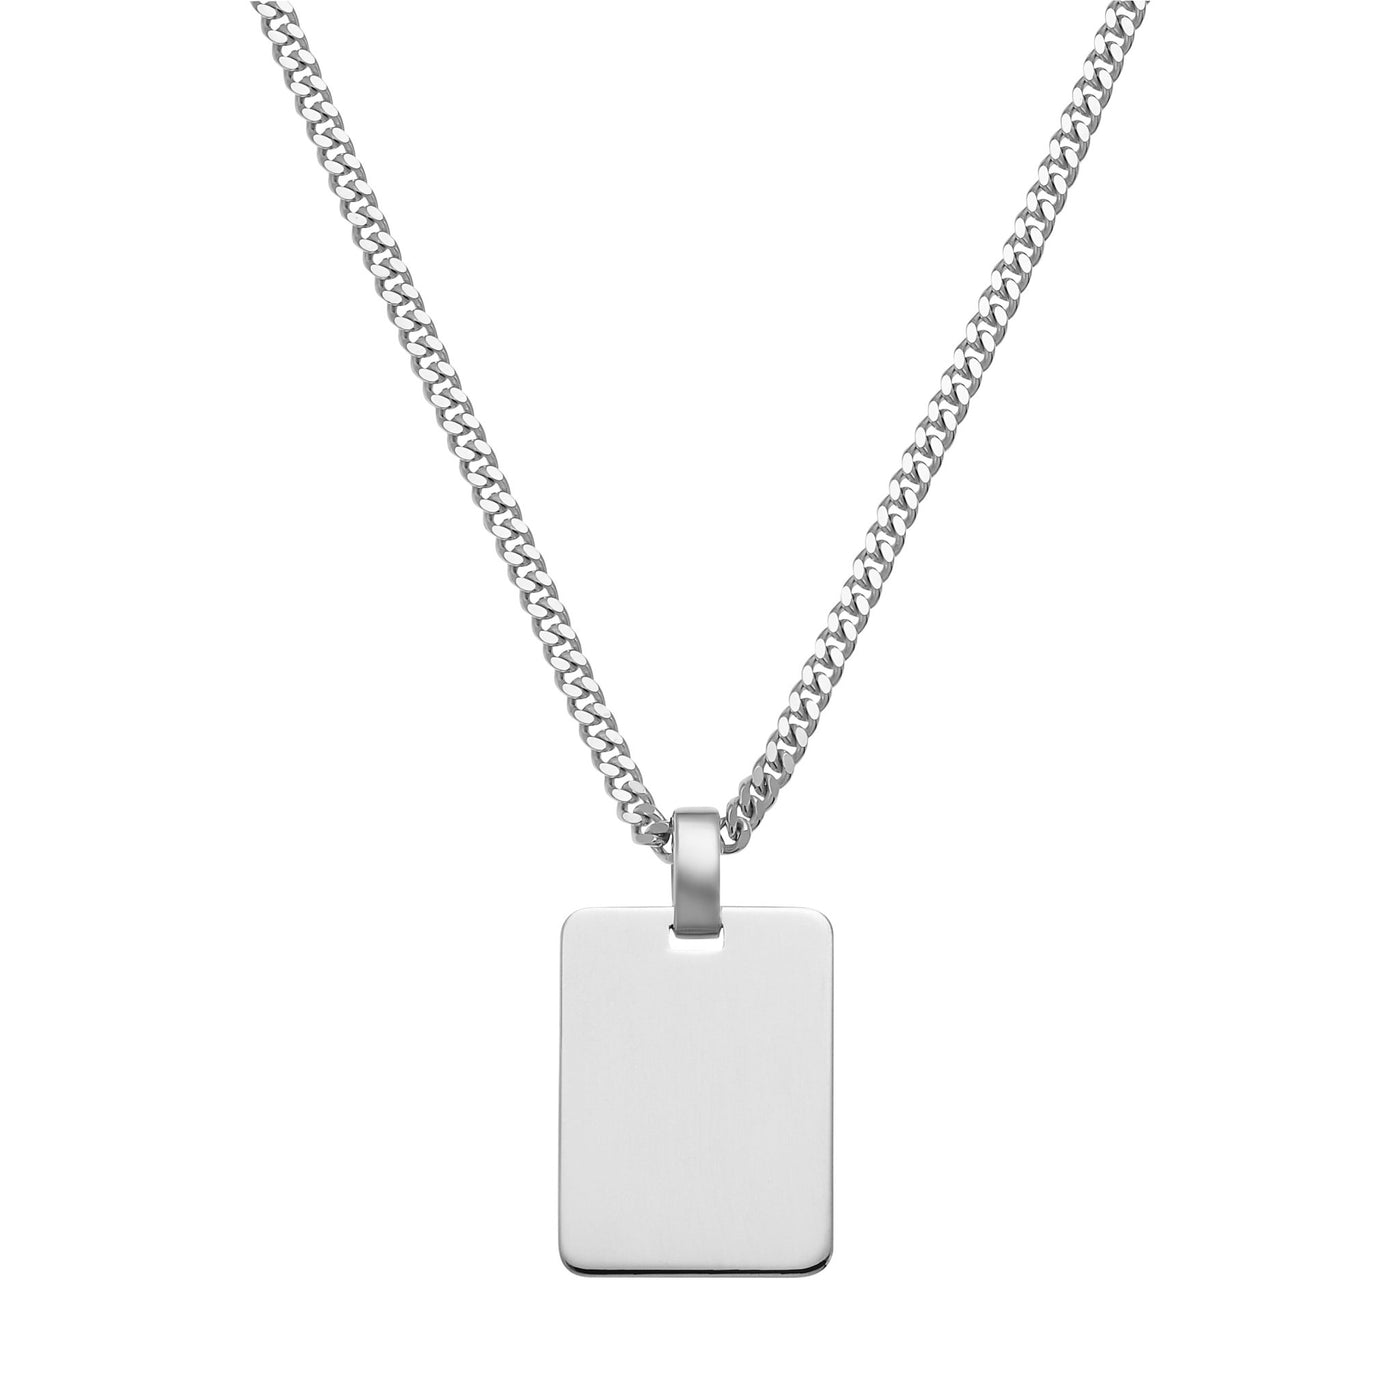 engraving plate rectangle necklace large 925 silver rhodium plated - identim®